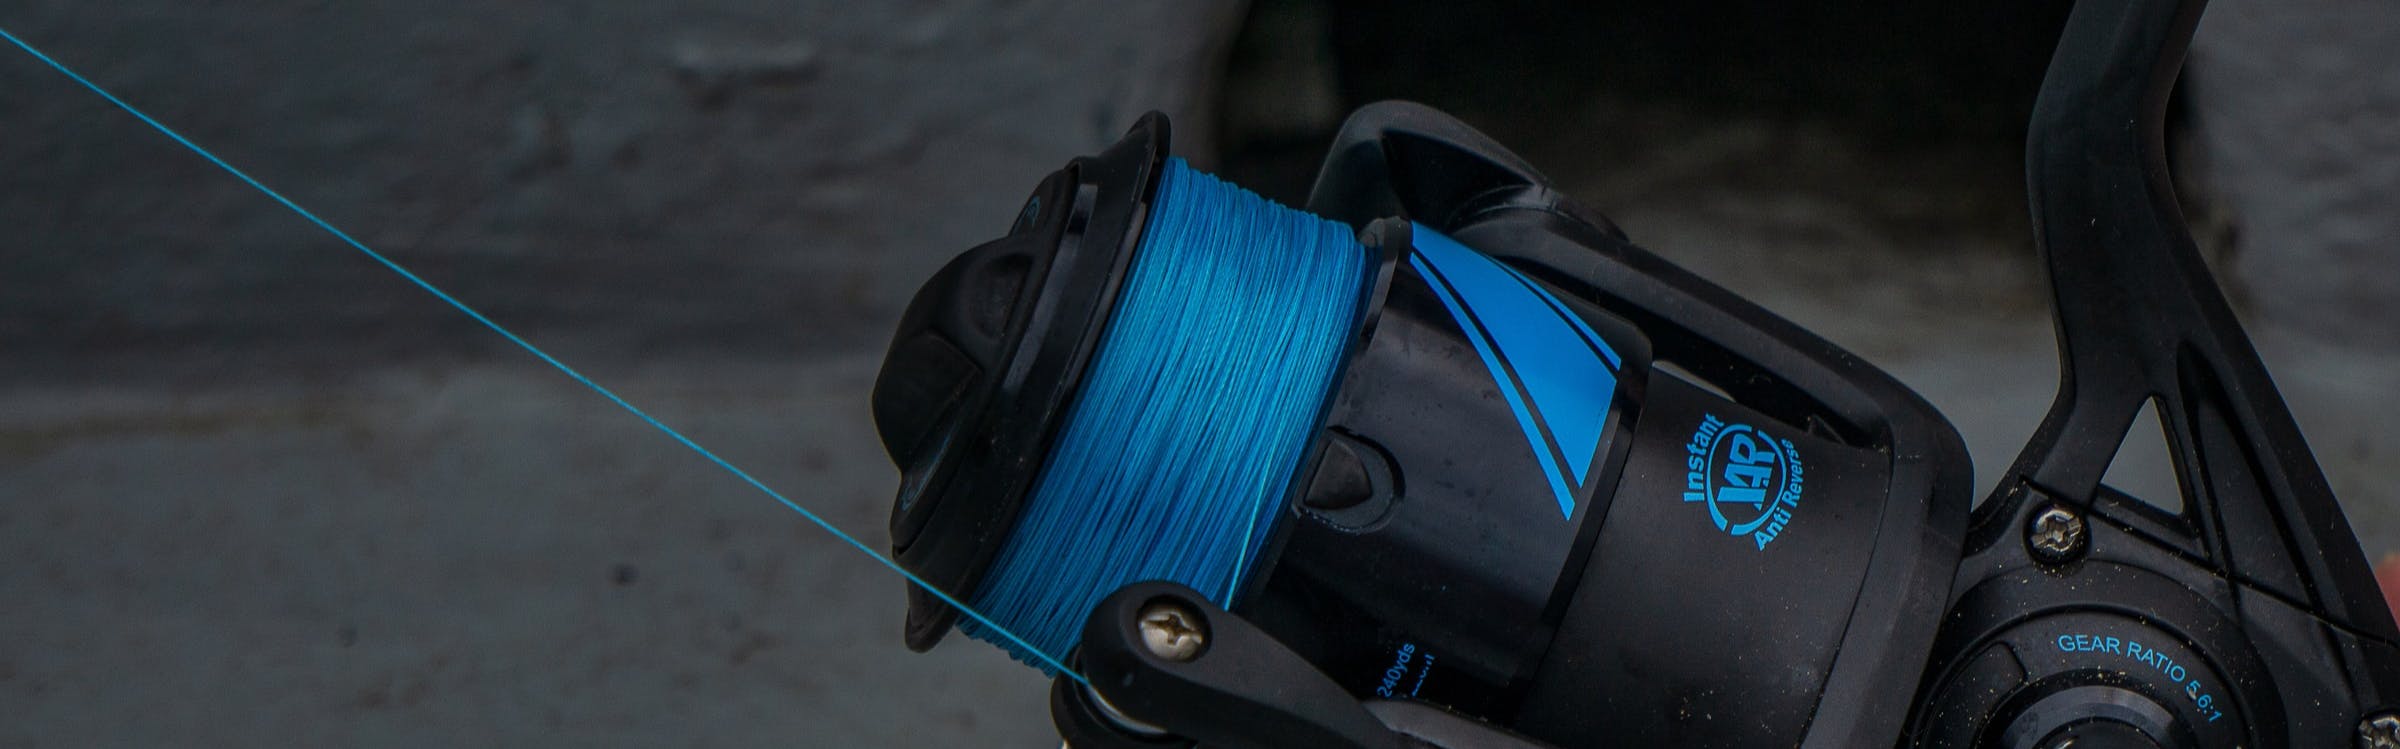 How to Choose the Best Fishing Line for Spinning Reels - Wired2Fish